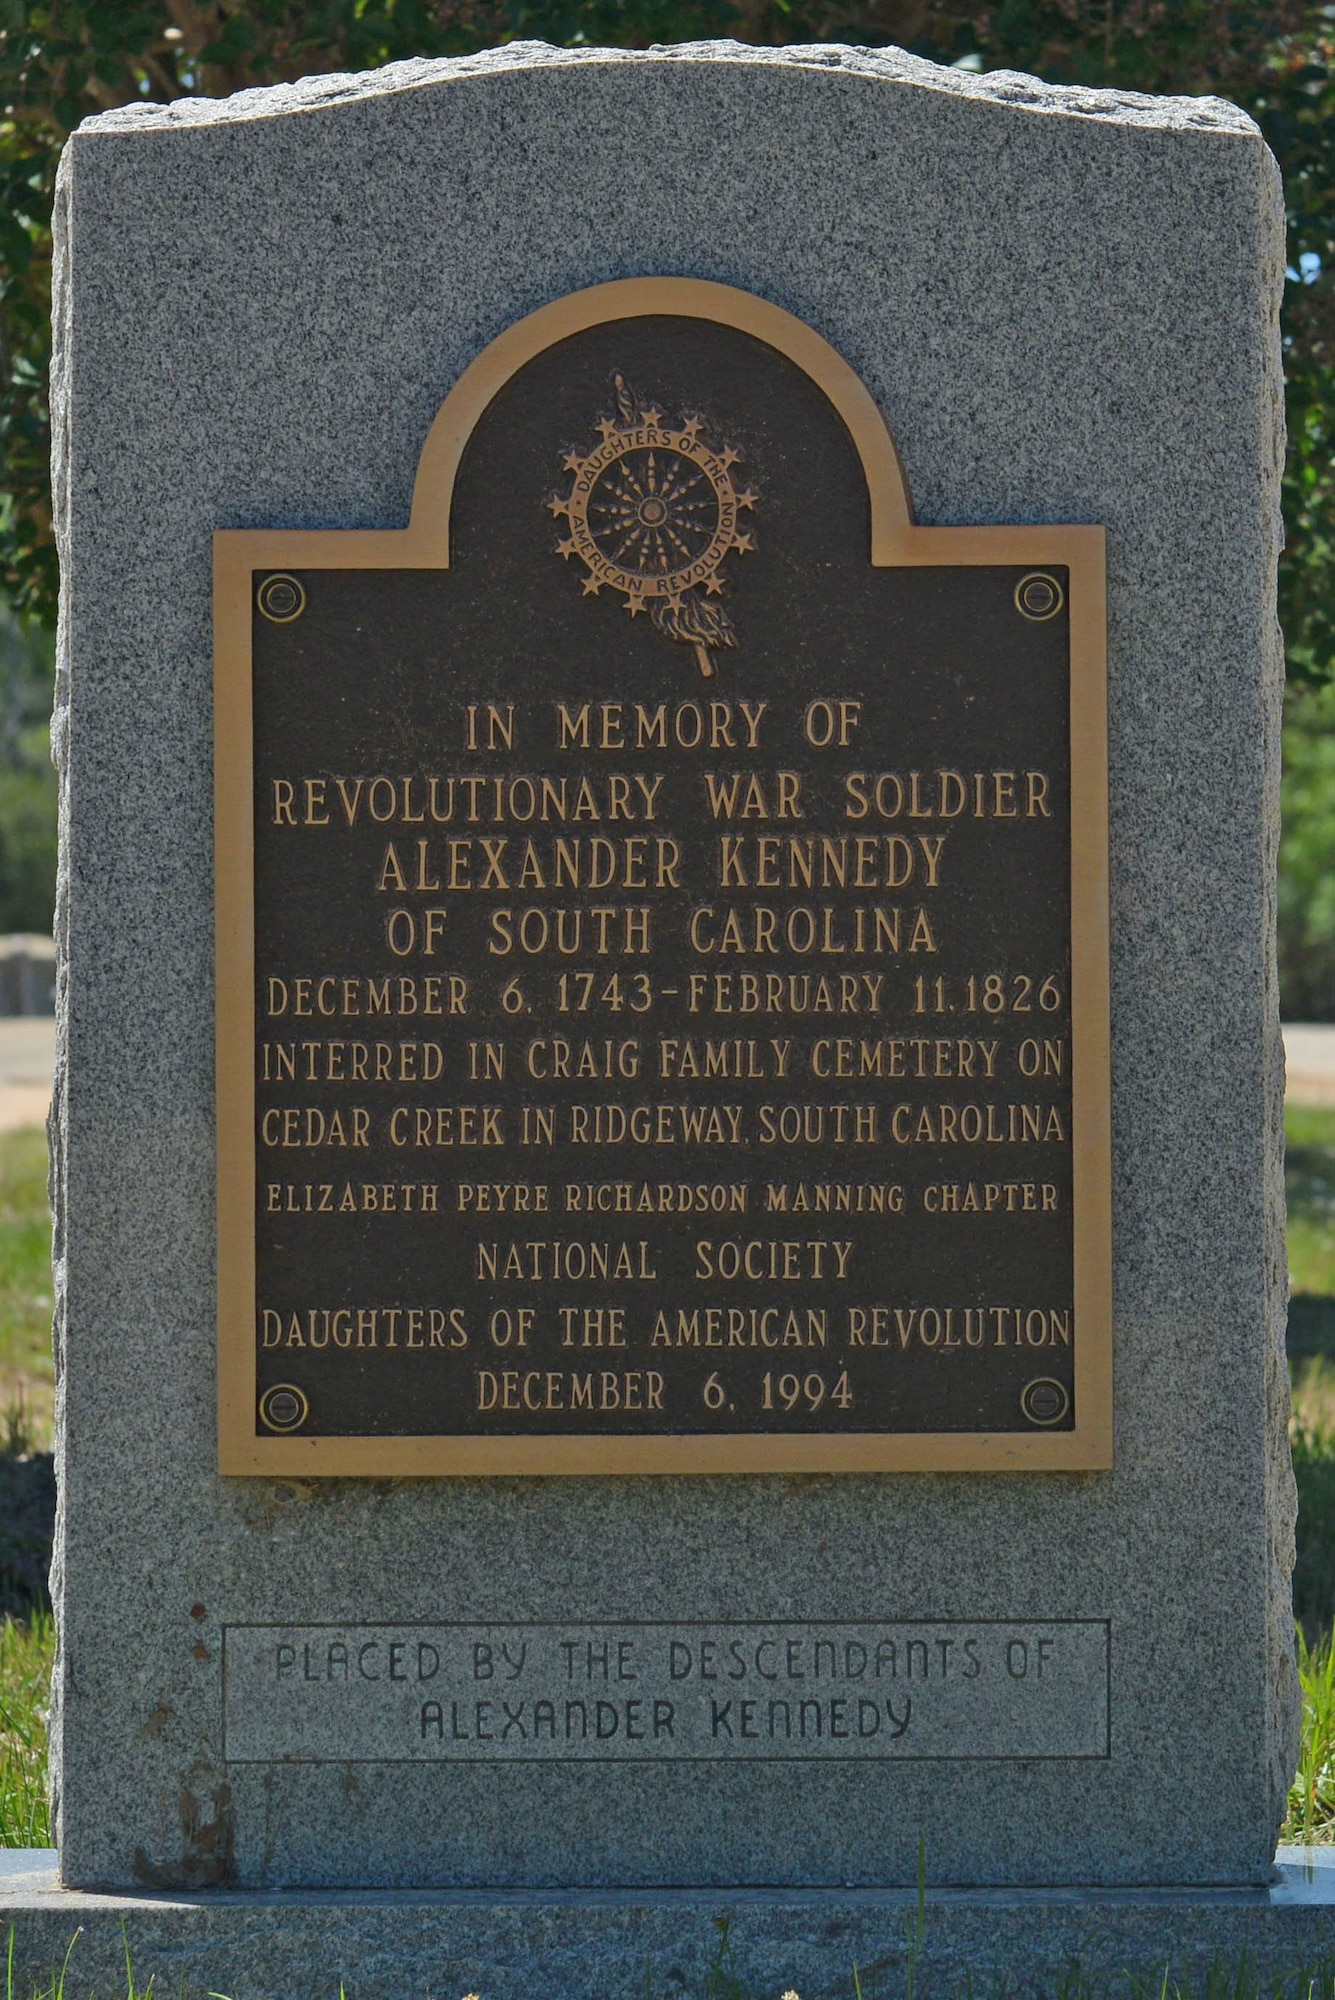 A memorial for Alexander Kennedy, Revolutionary War soldier, stands at Sumter Cemetery, in Sumter, S.C., May 2, 2017. Service members from all branches of service and conflicts have been laid to rest at Sumter Cemetery. (U.S. Air Force photo by Airman 1st Class Destinee Sweeney)